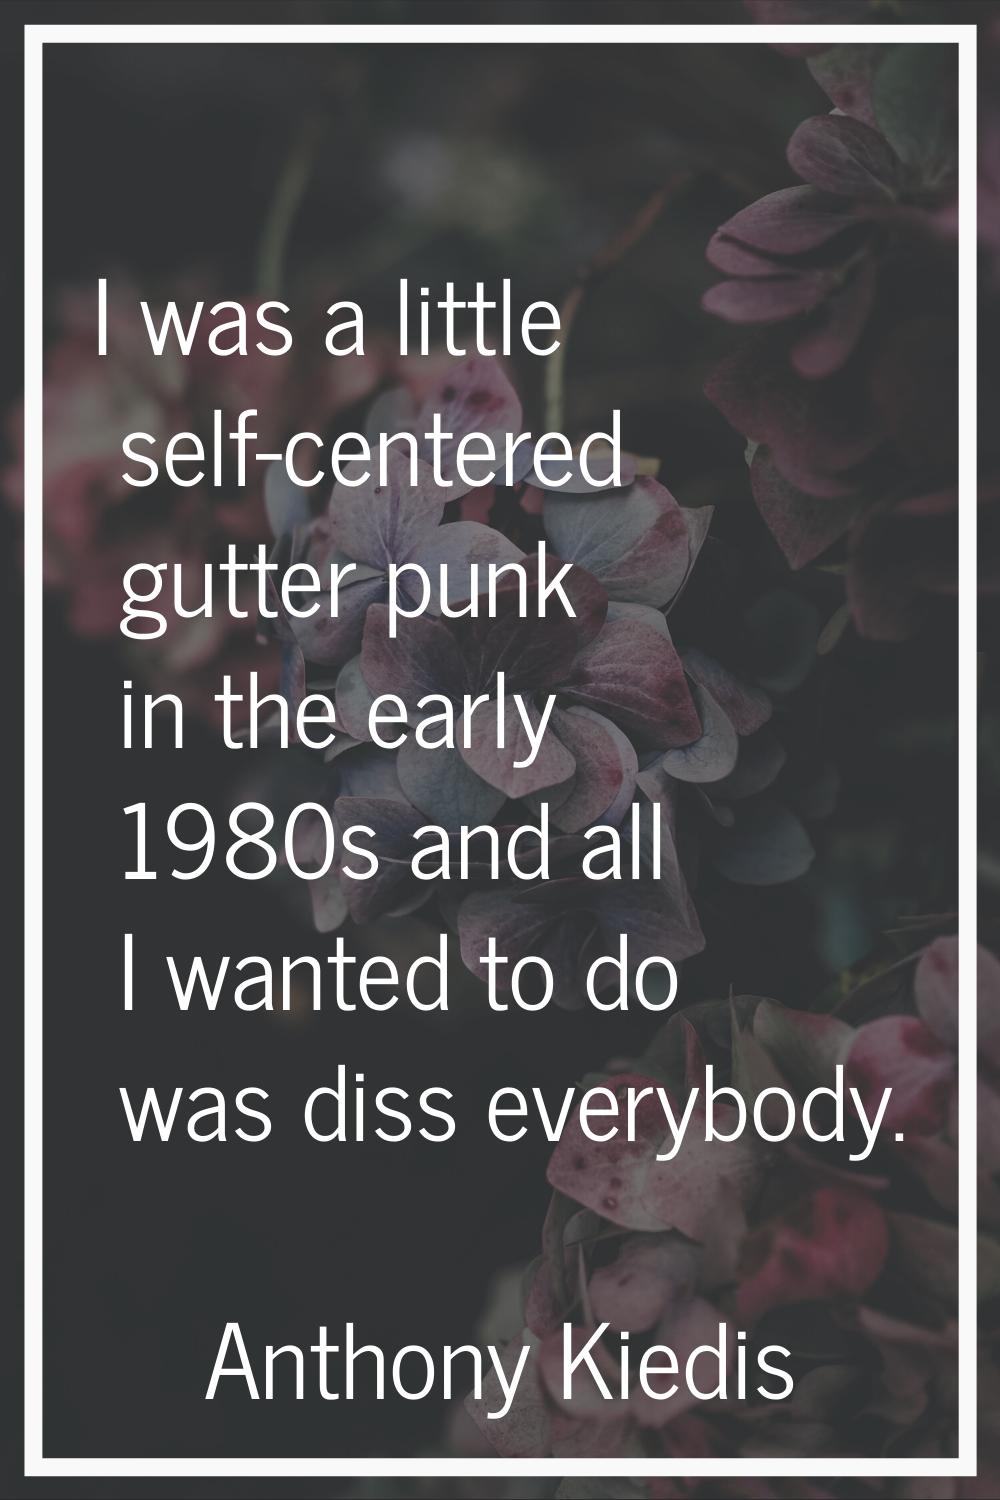 I was a little self-centered gutter punk in the early 1980s and all I wanted to do was diss everybo